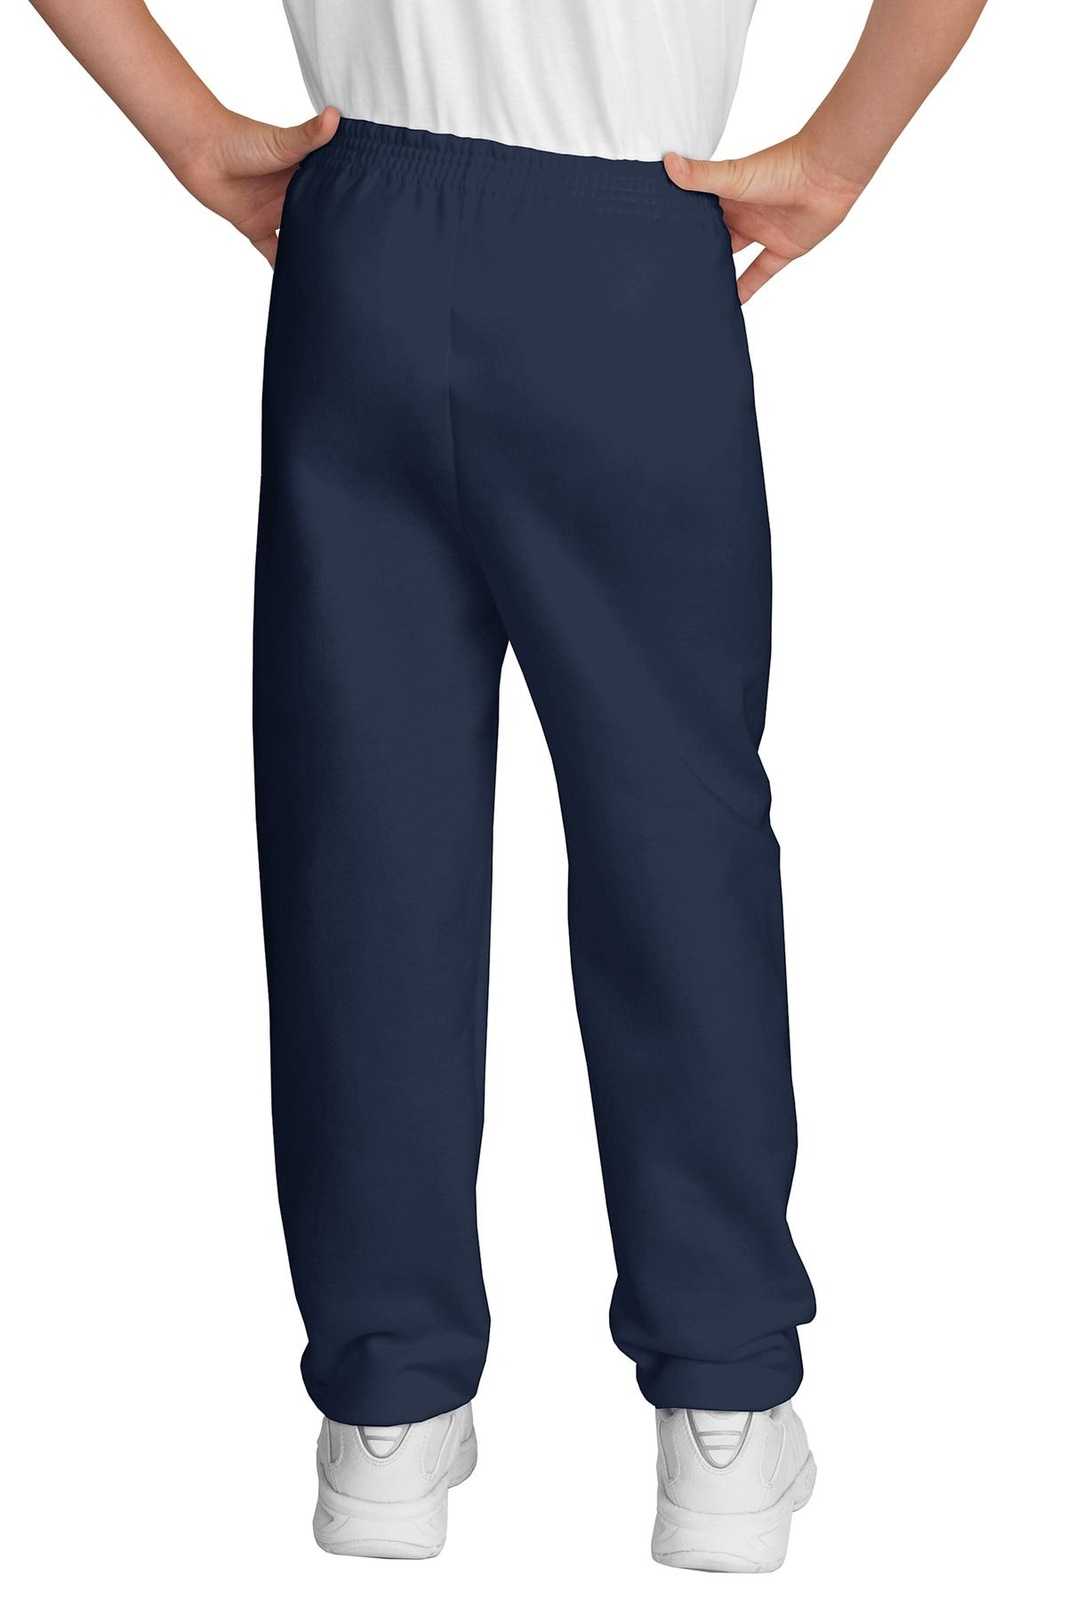 Port & Company PC90YP Youth Core Fleece Sweatpant - Navy - HIT a Double - 1